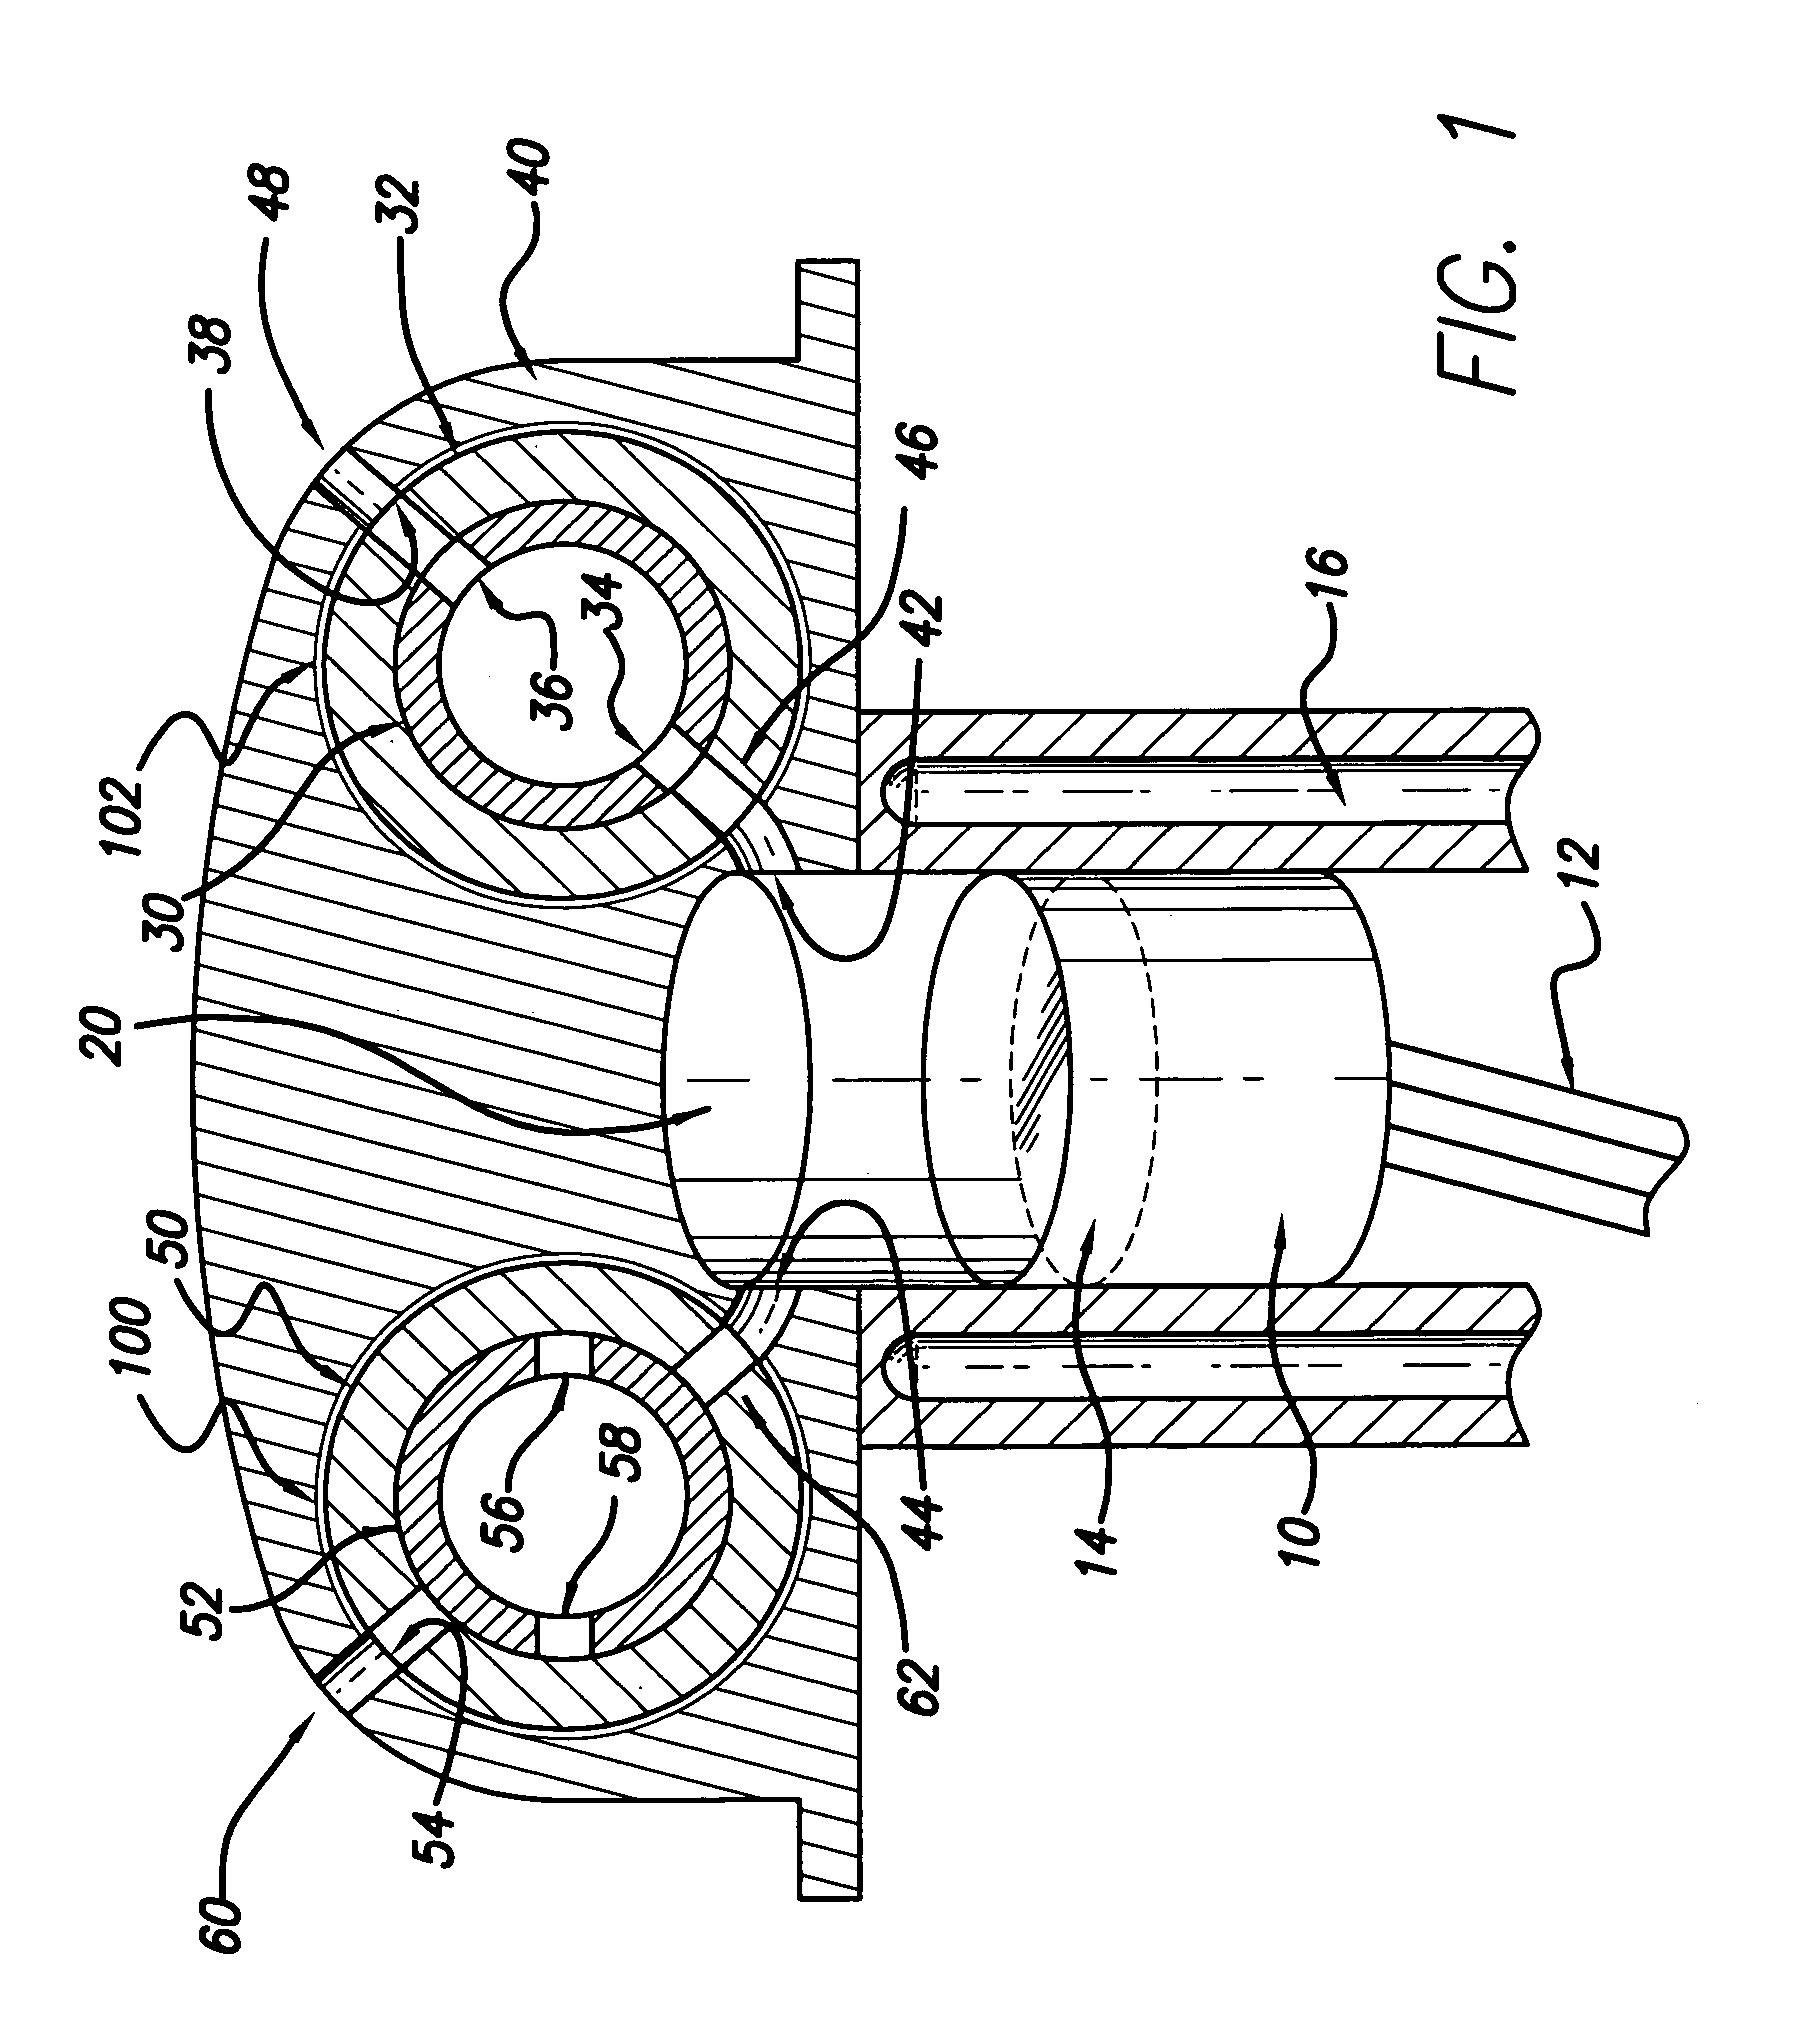 Slotted cylindrical tube rotary valve assembly